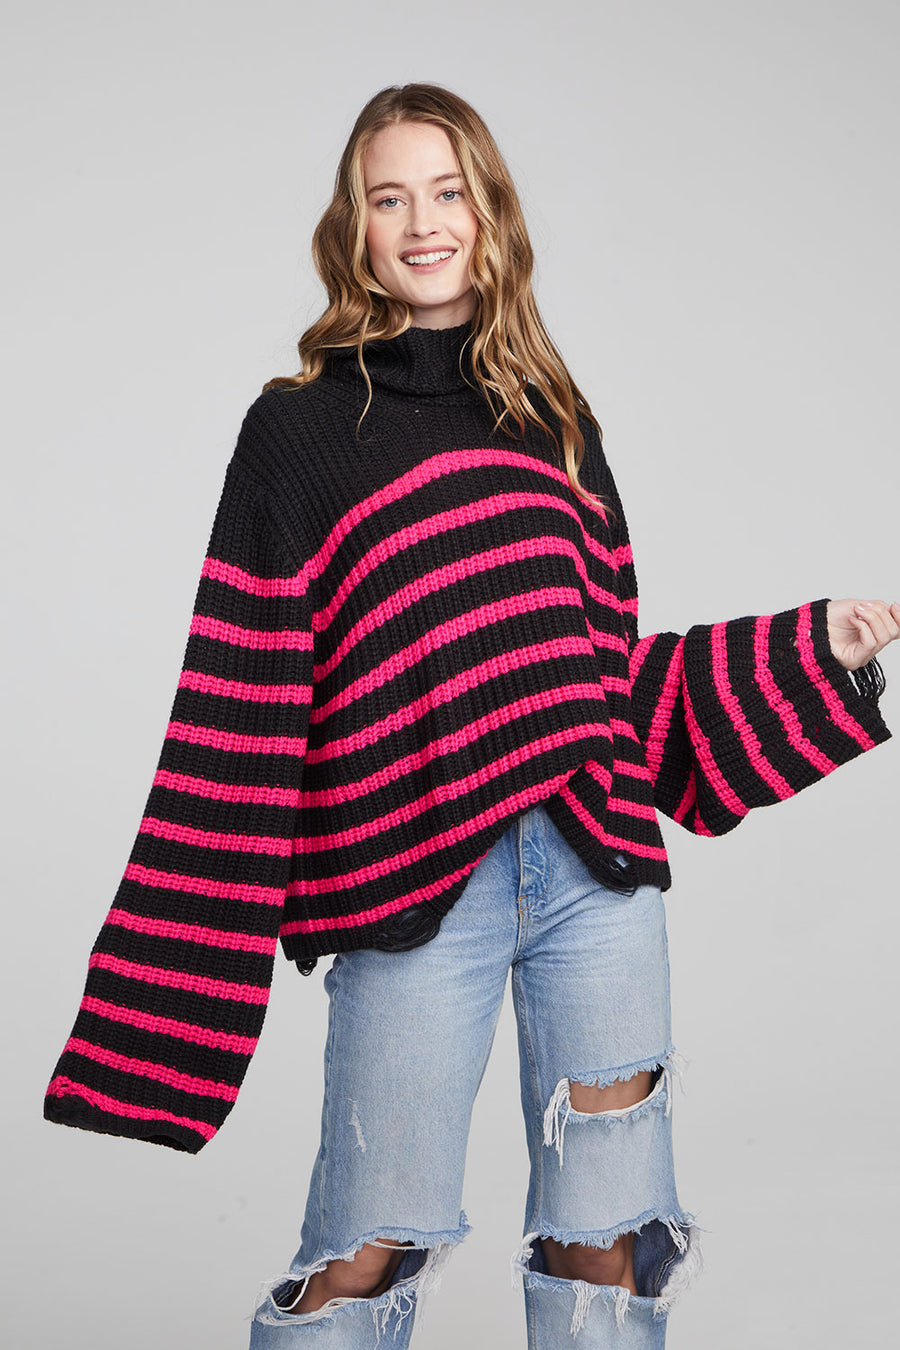 Aimee Melrose Stripe Pullover WOMENS chaserbrand